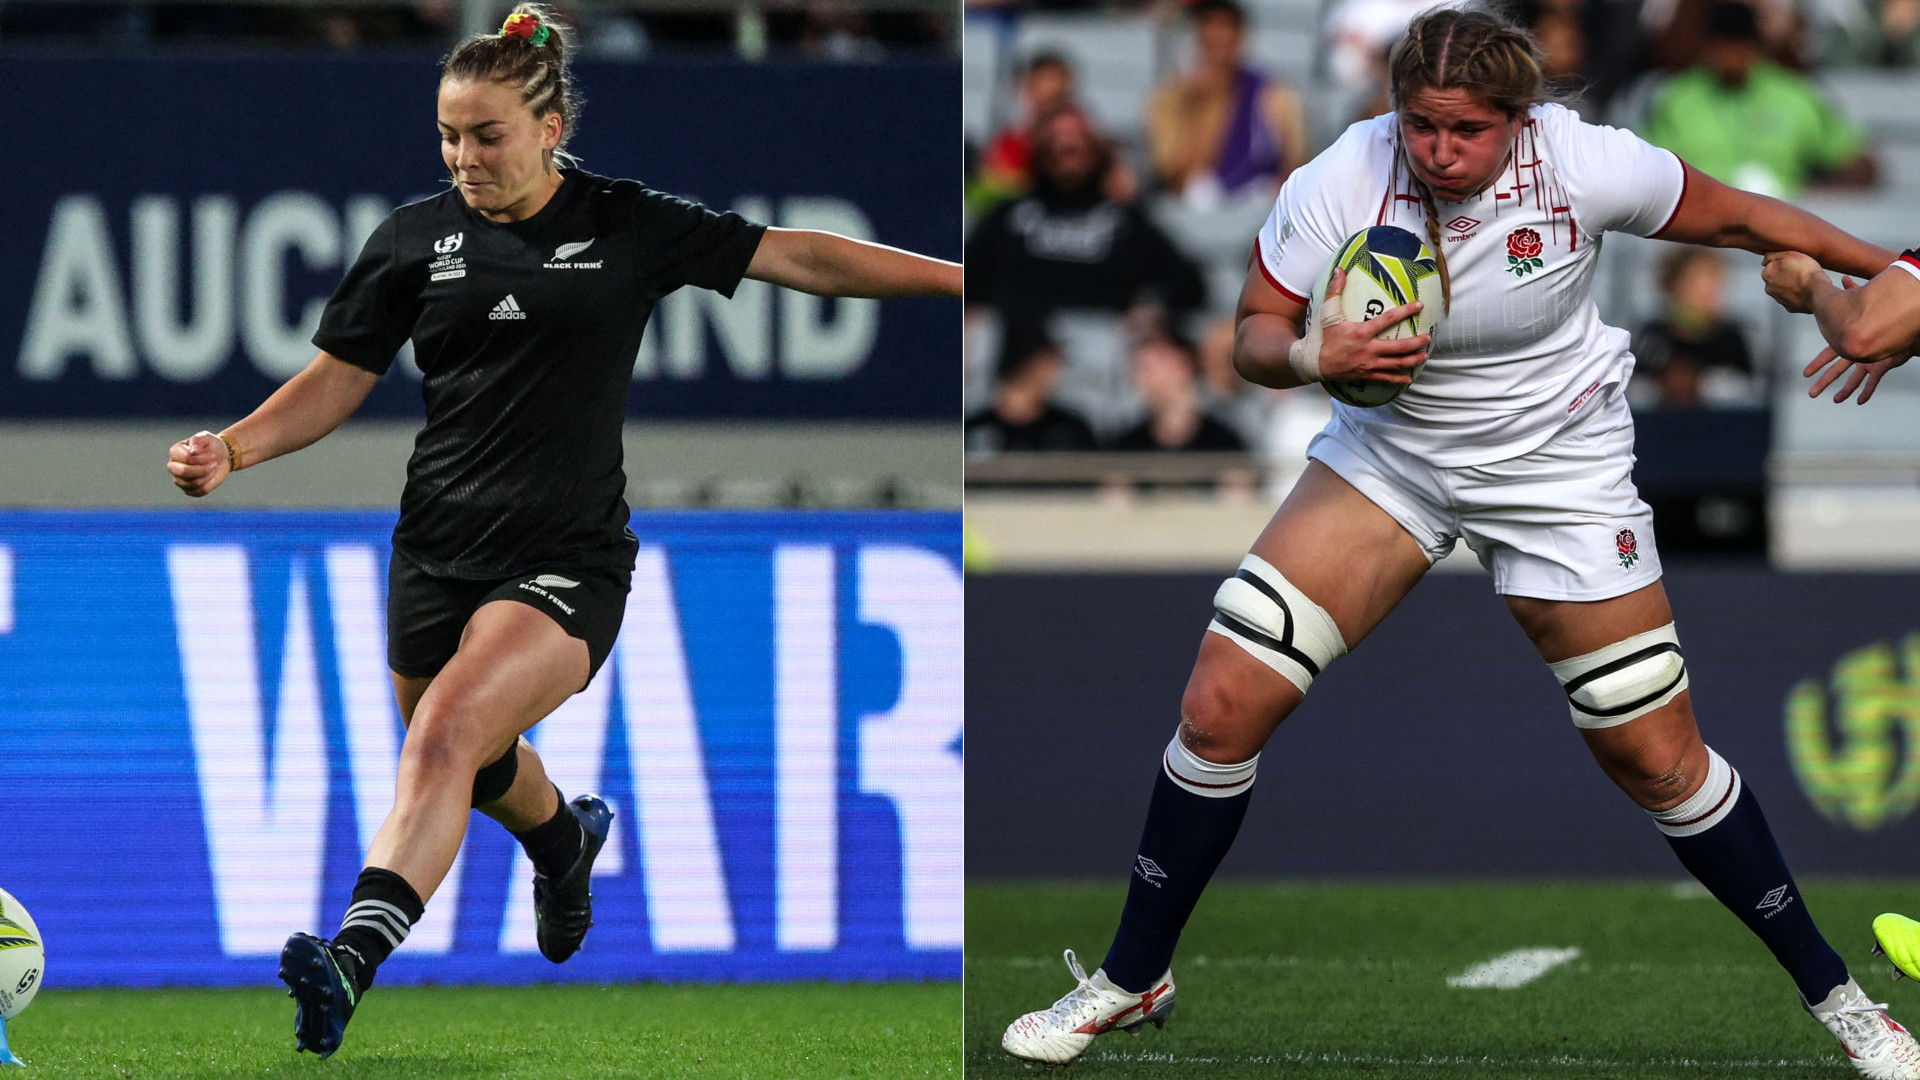 New Zealand vs England live stream how to watch Womens Rugby World Cup 2021 final online today